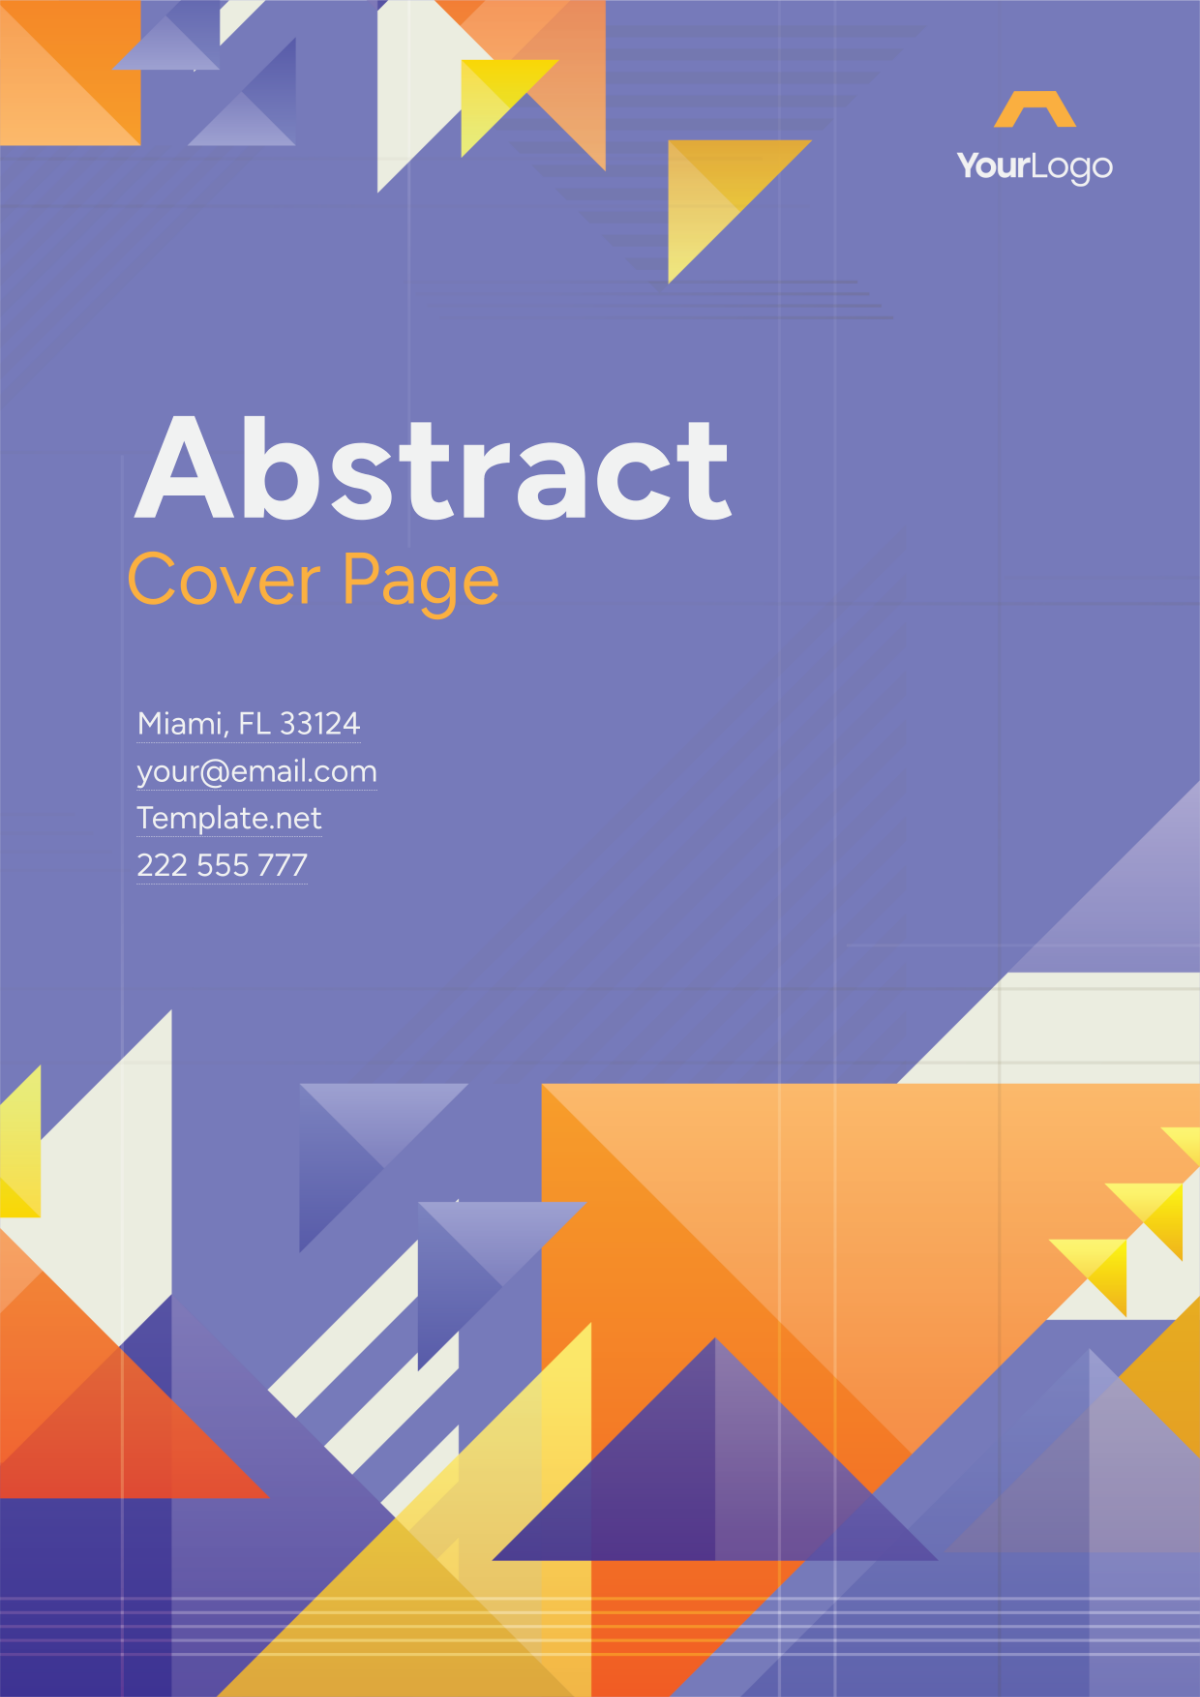 Abstract Heading Cover Page